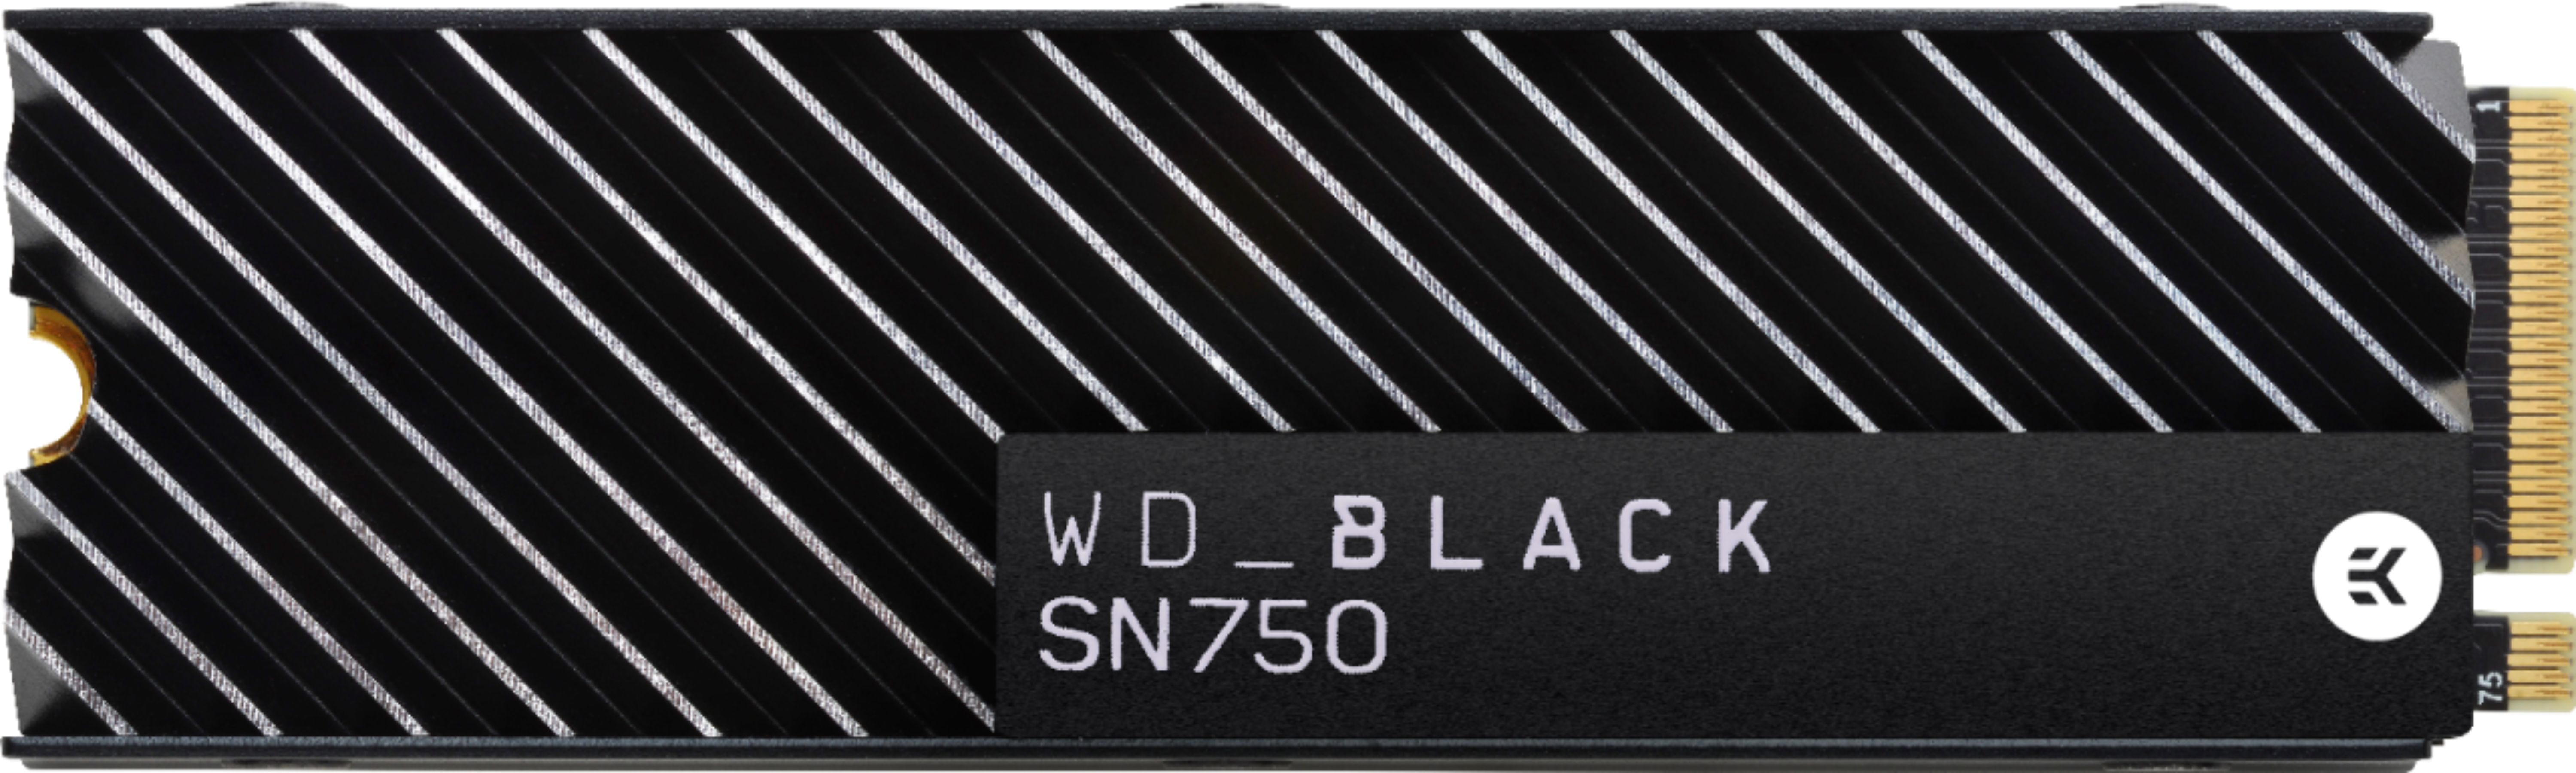 Wd Wd Black Sn750 Nvme 500gb Internal Pci Express 3 0 X4 Solid State Drive For Desktops Only Wdbgmp5000anc Wrsn Best Buy